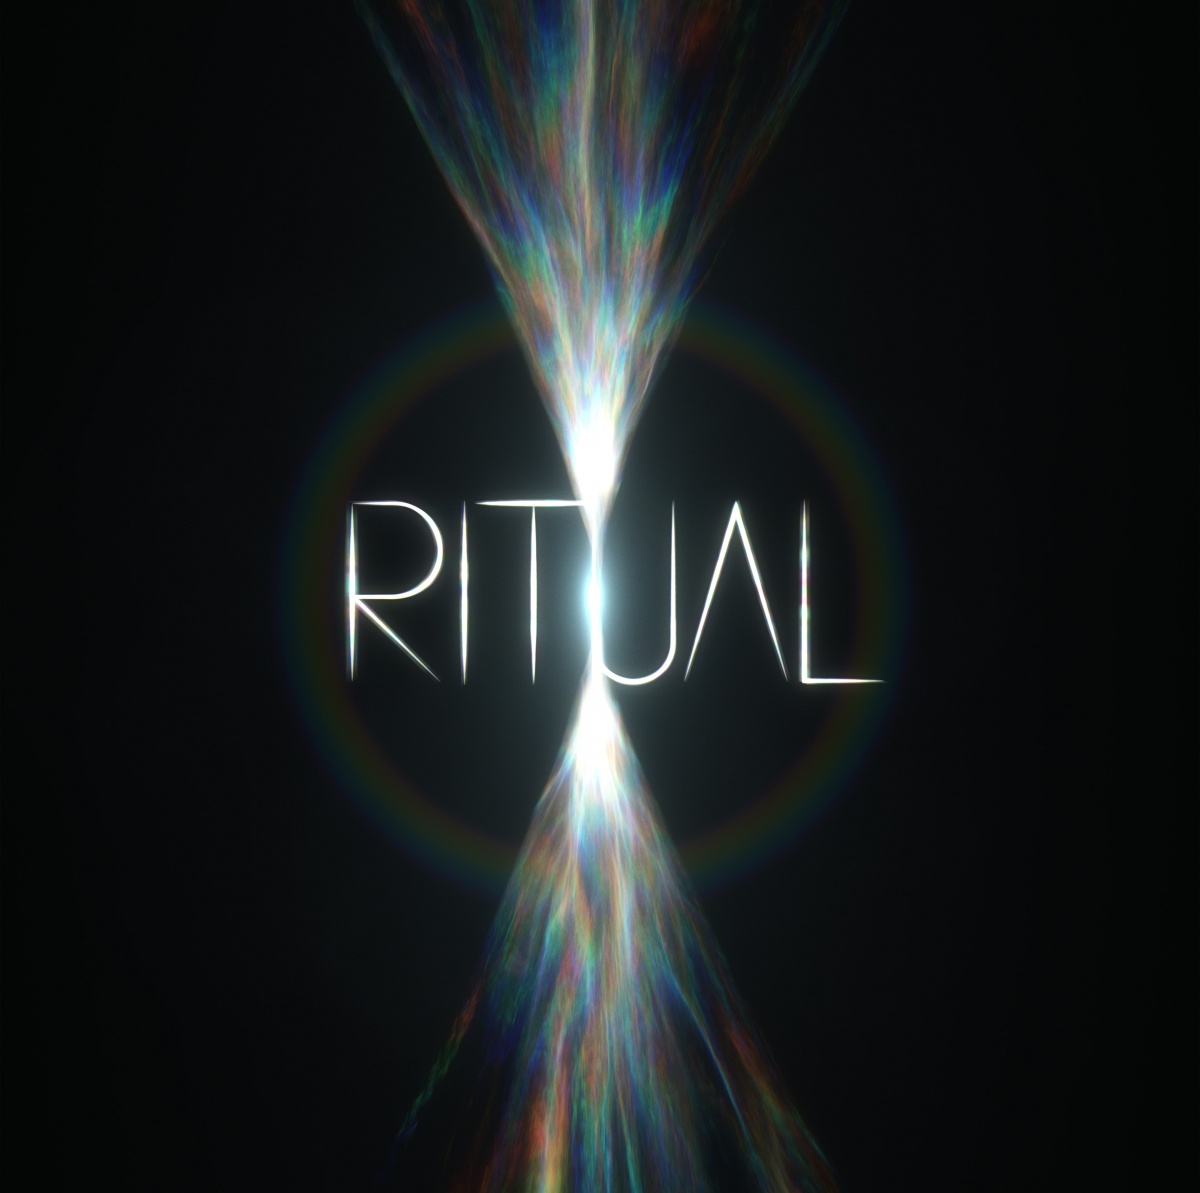 My new album, RITUAL, will be released on August 30